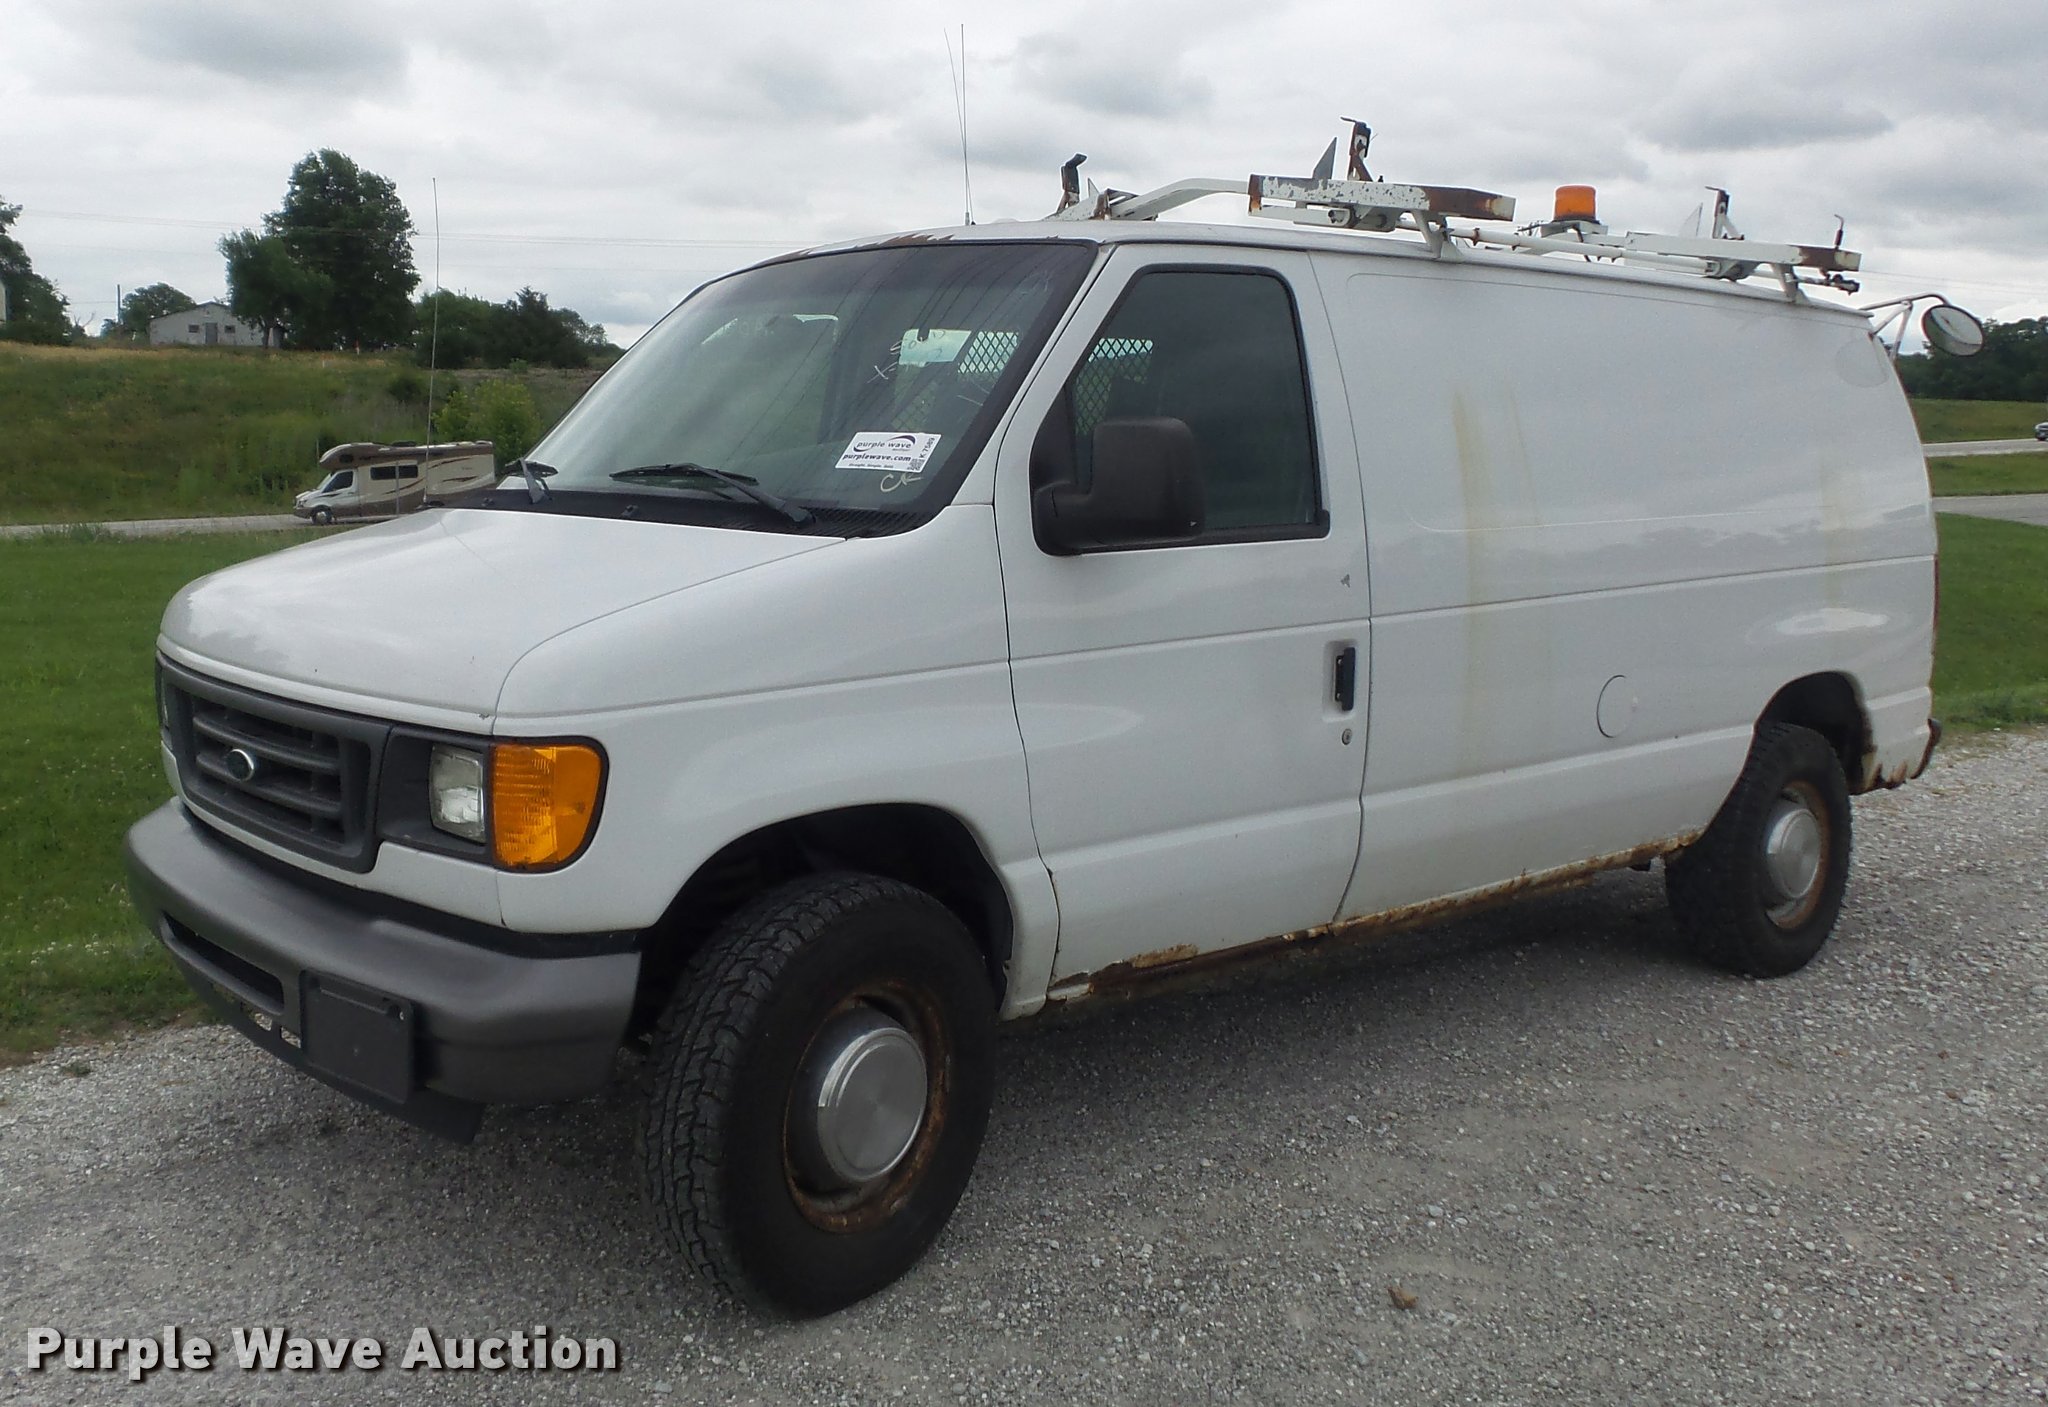 2004 Ford E250 van in Moscow Mills, MO | Item K7589 sold | Purple Wave